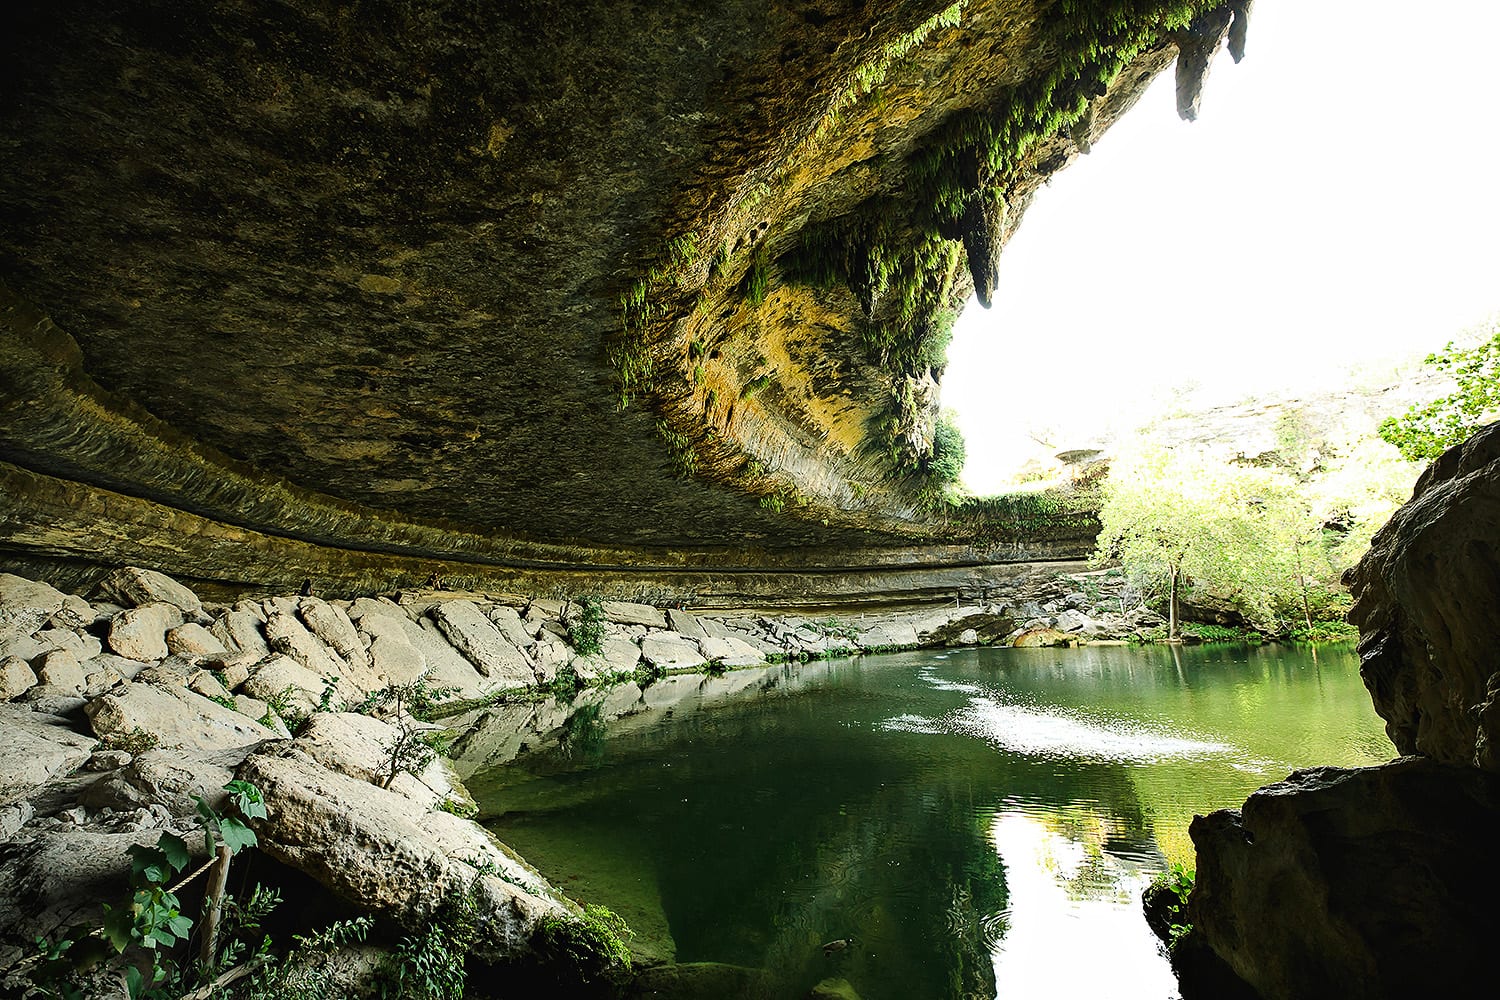 Hamilton Pool grotto Dripping Springs, Texas photo by Lauren Clark Photography